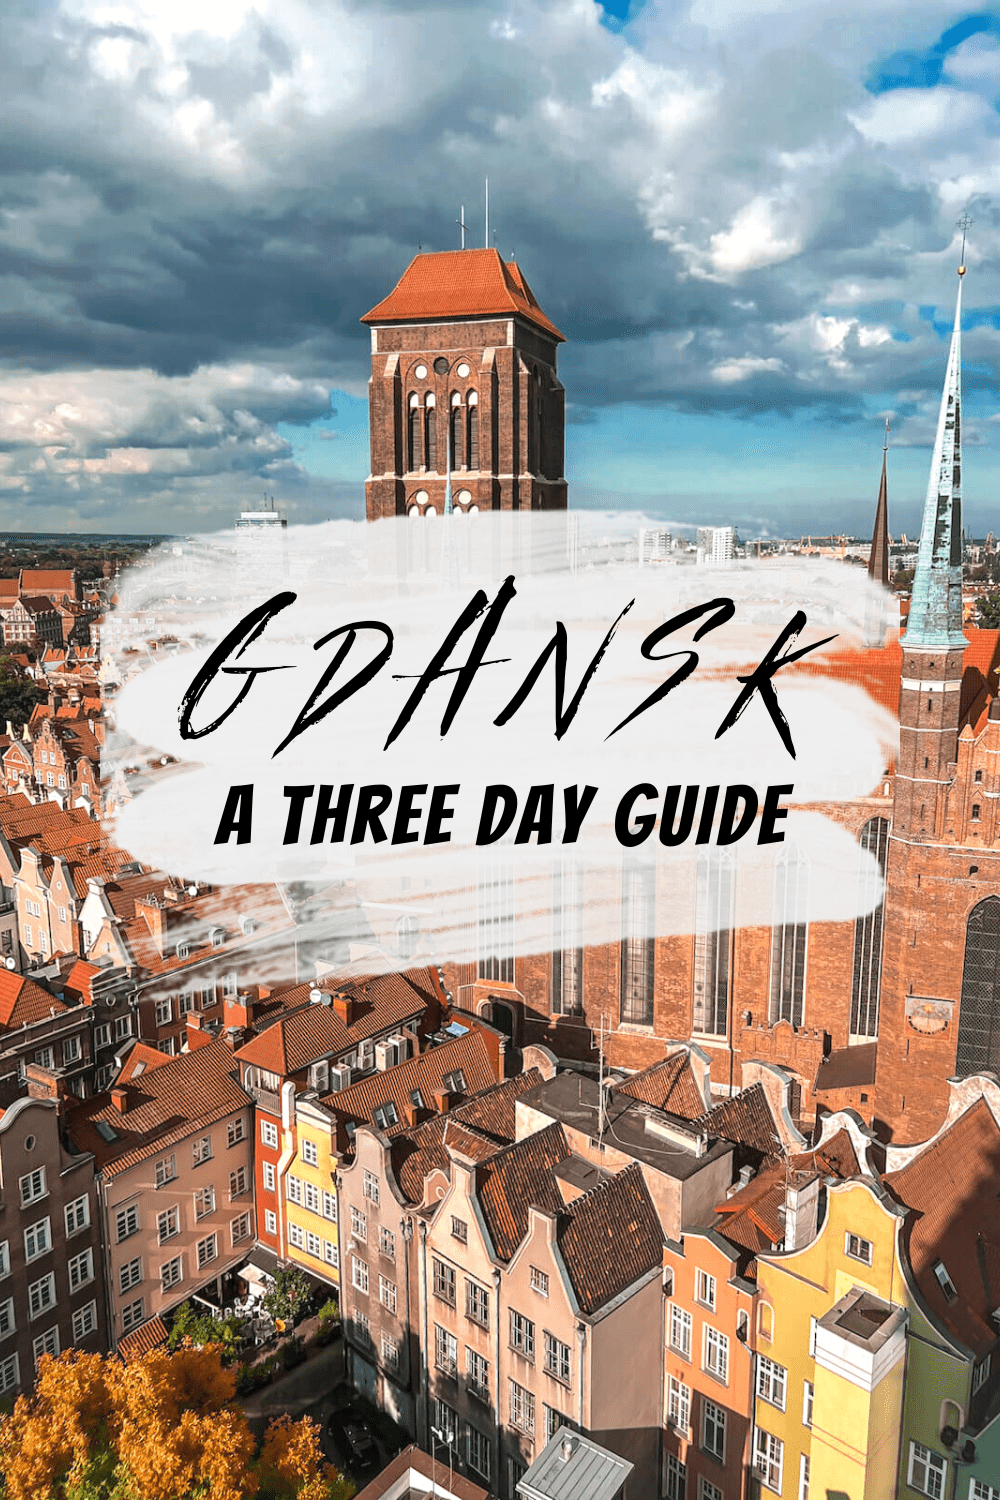 Gdansk: a three day guide